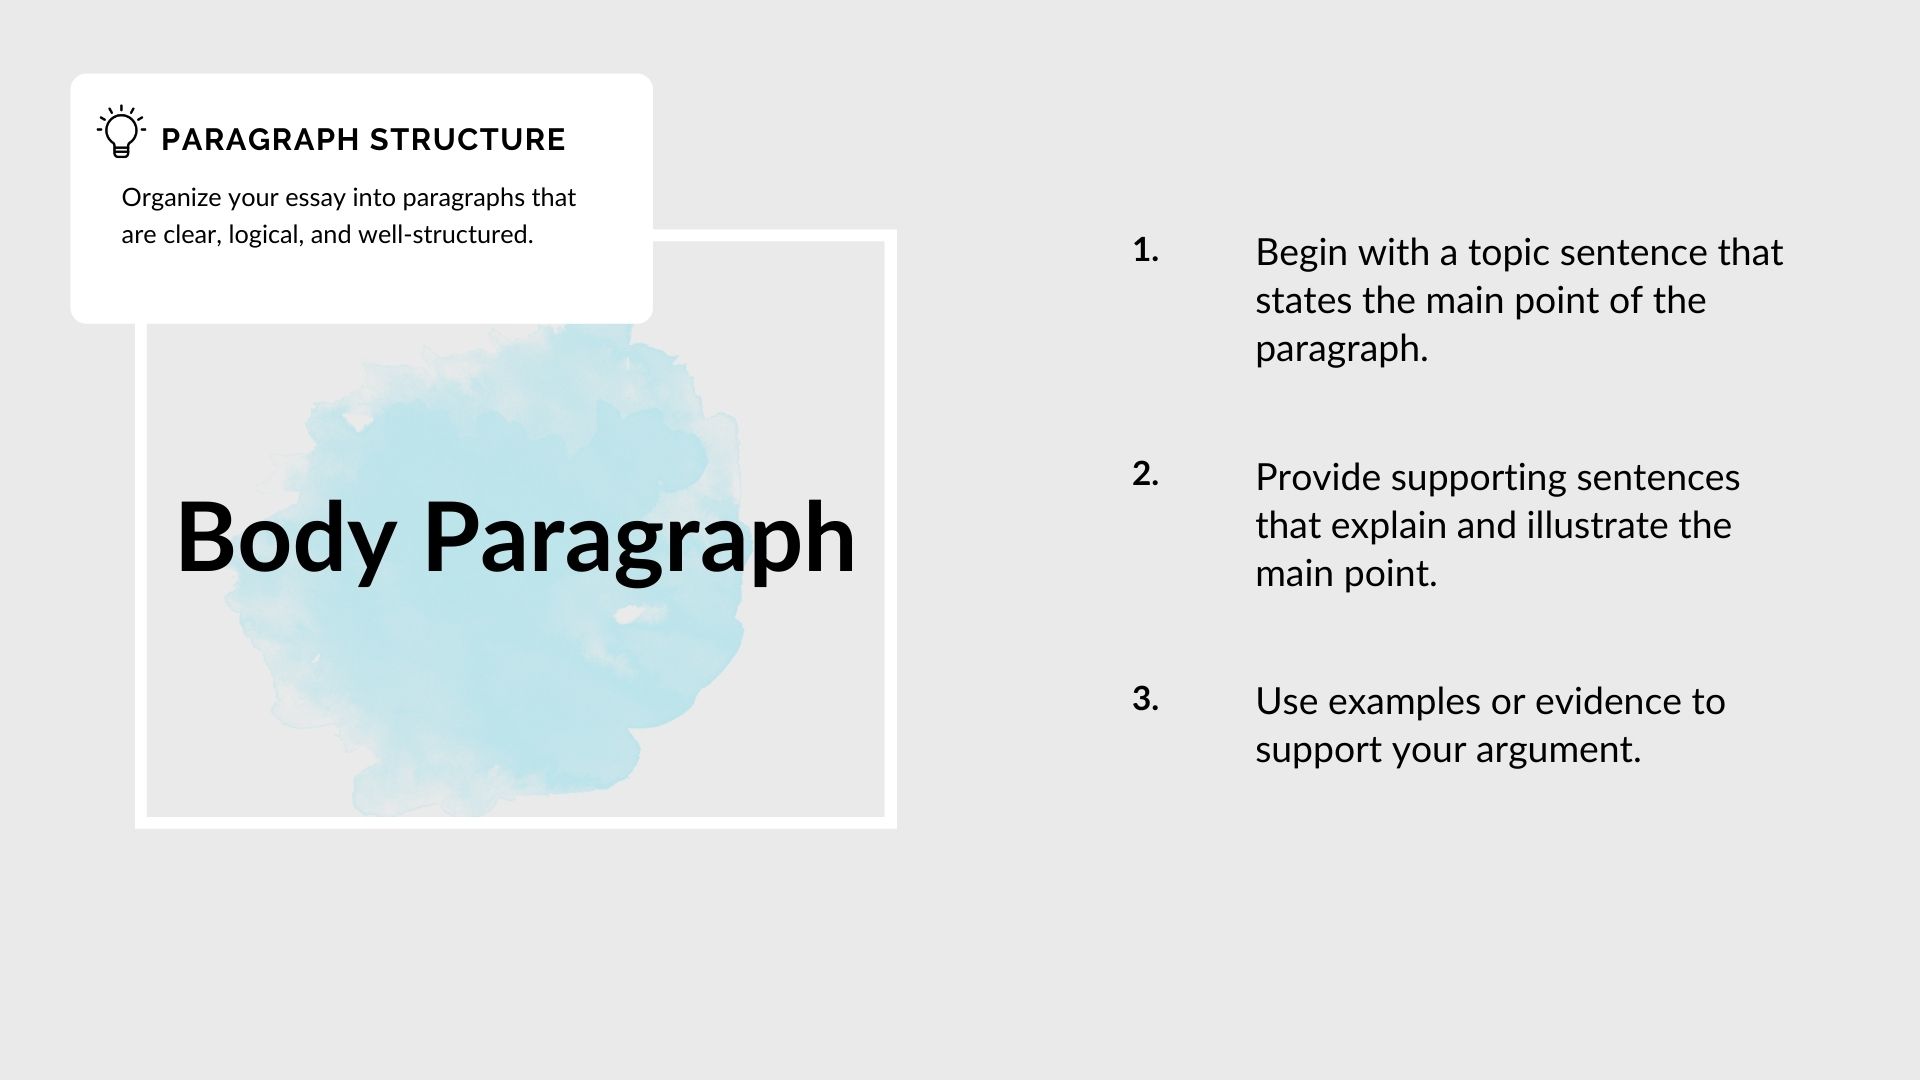 IELTS Writing task 2 - body paragraph structure